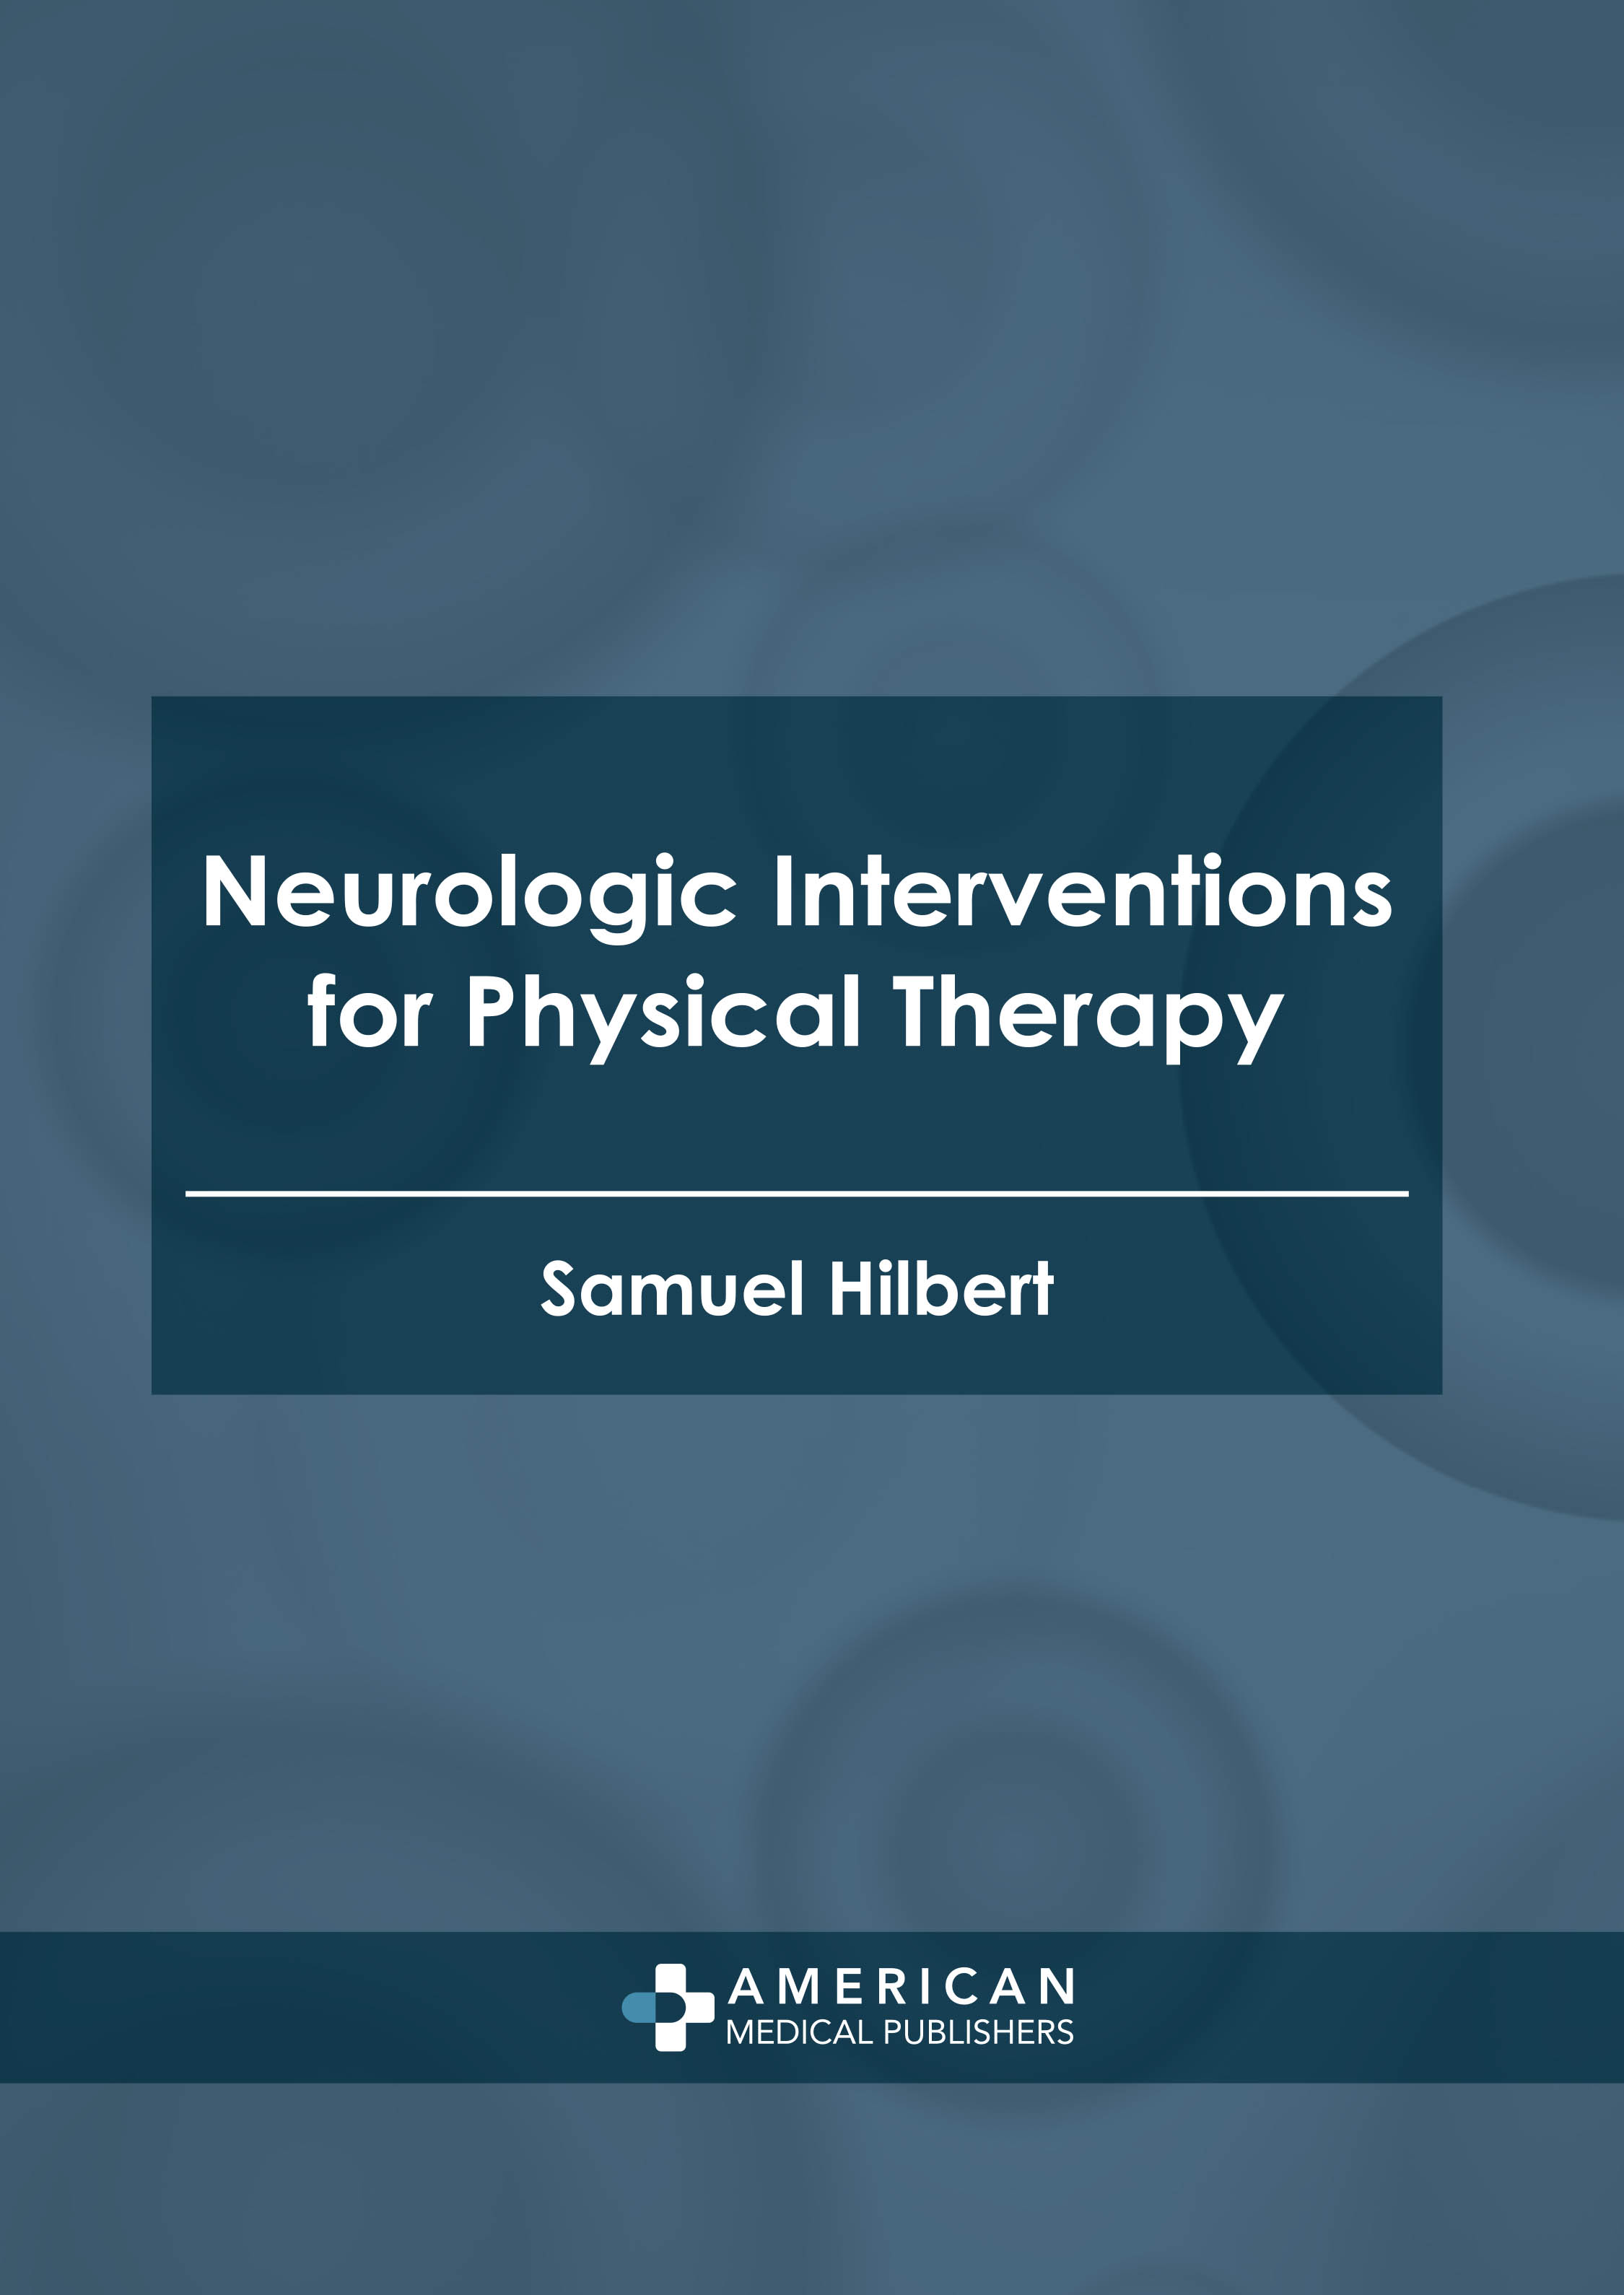 exclusive-publishers/american-medical-publishers/neurologic-interventions-for-physical-therapy-9781639275434